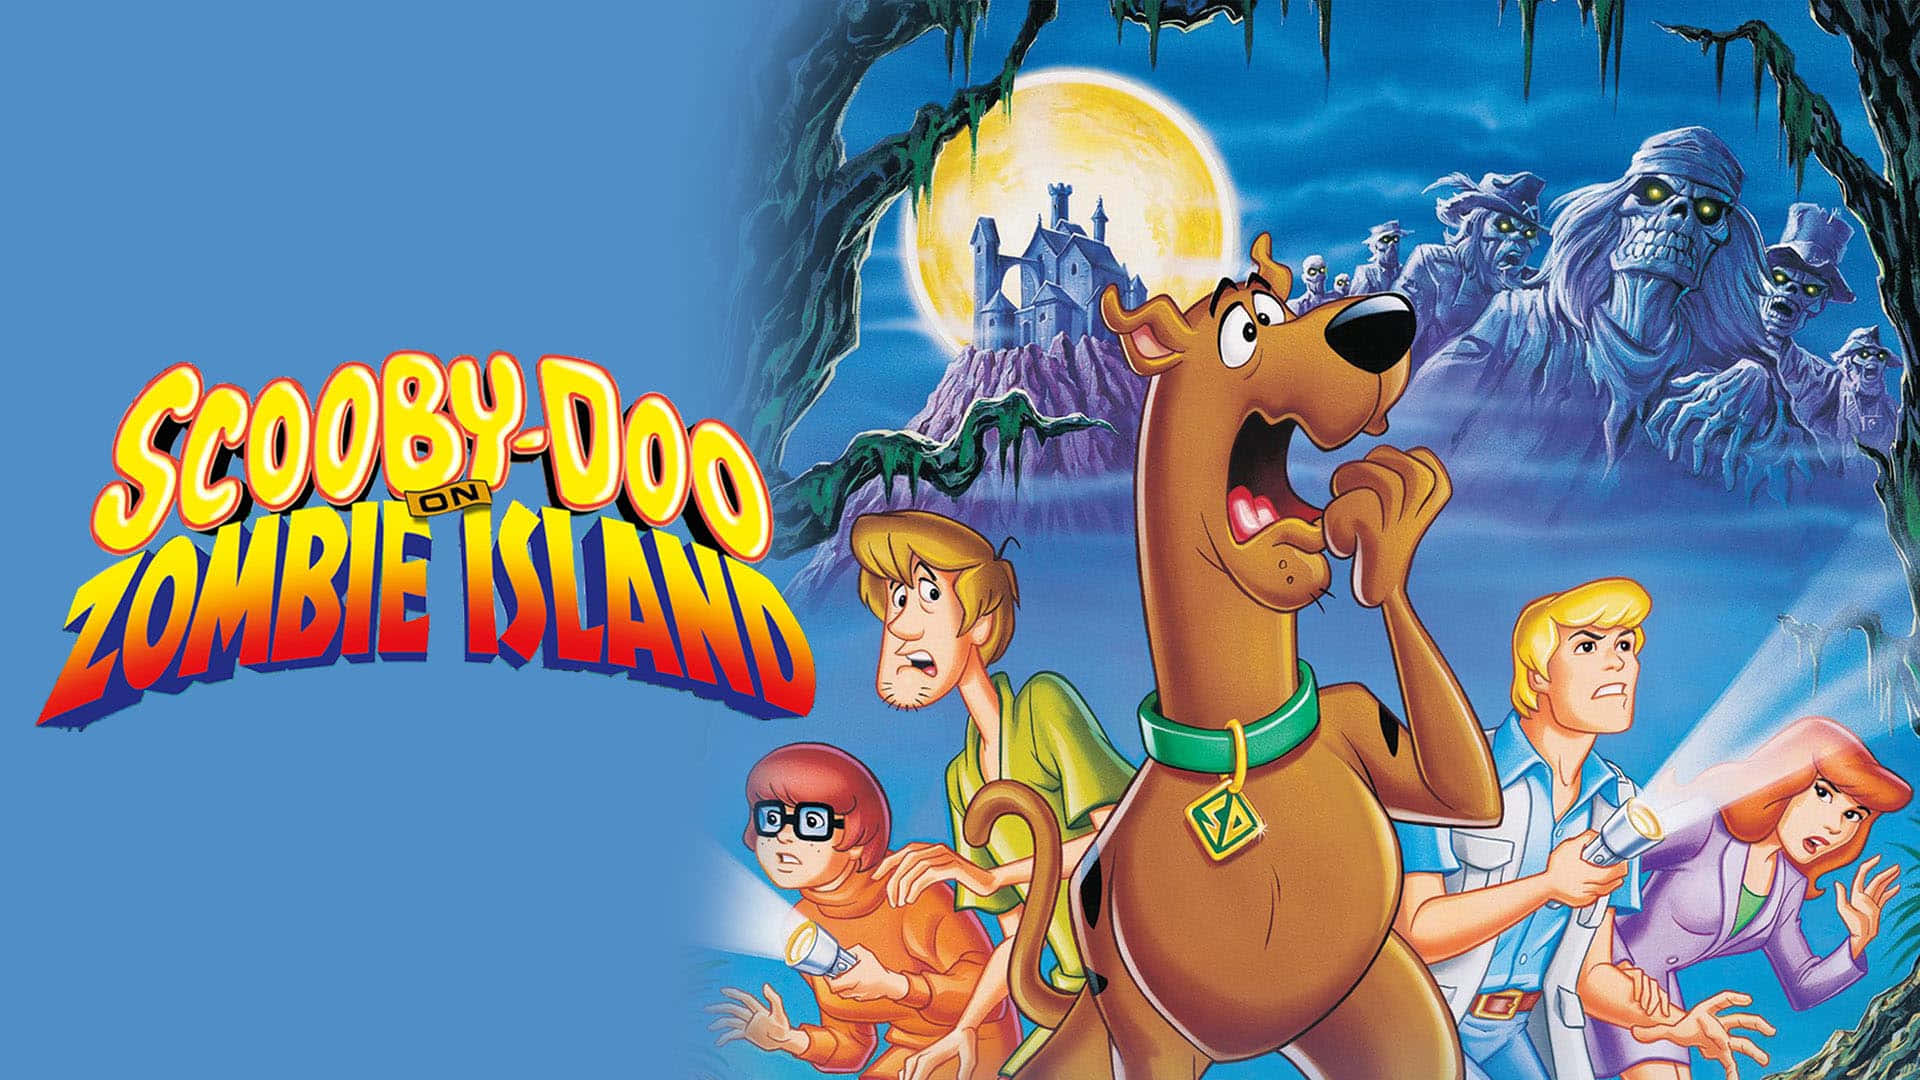 Scooby-Doo, the beloved cartoon mystery-solving pup.